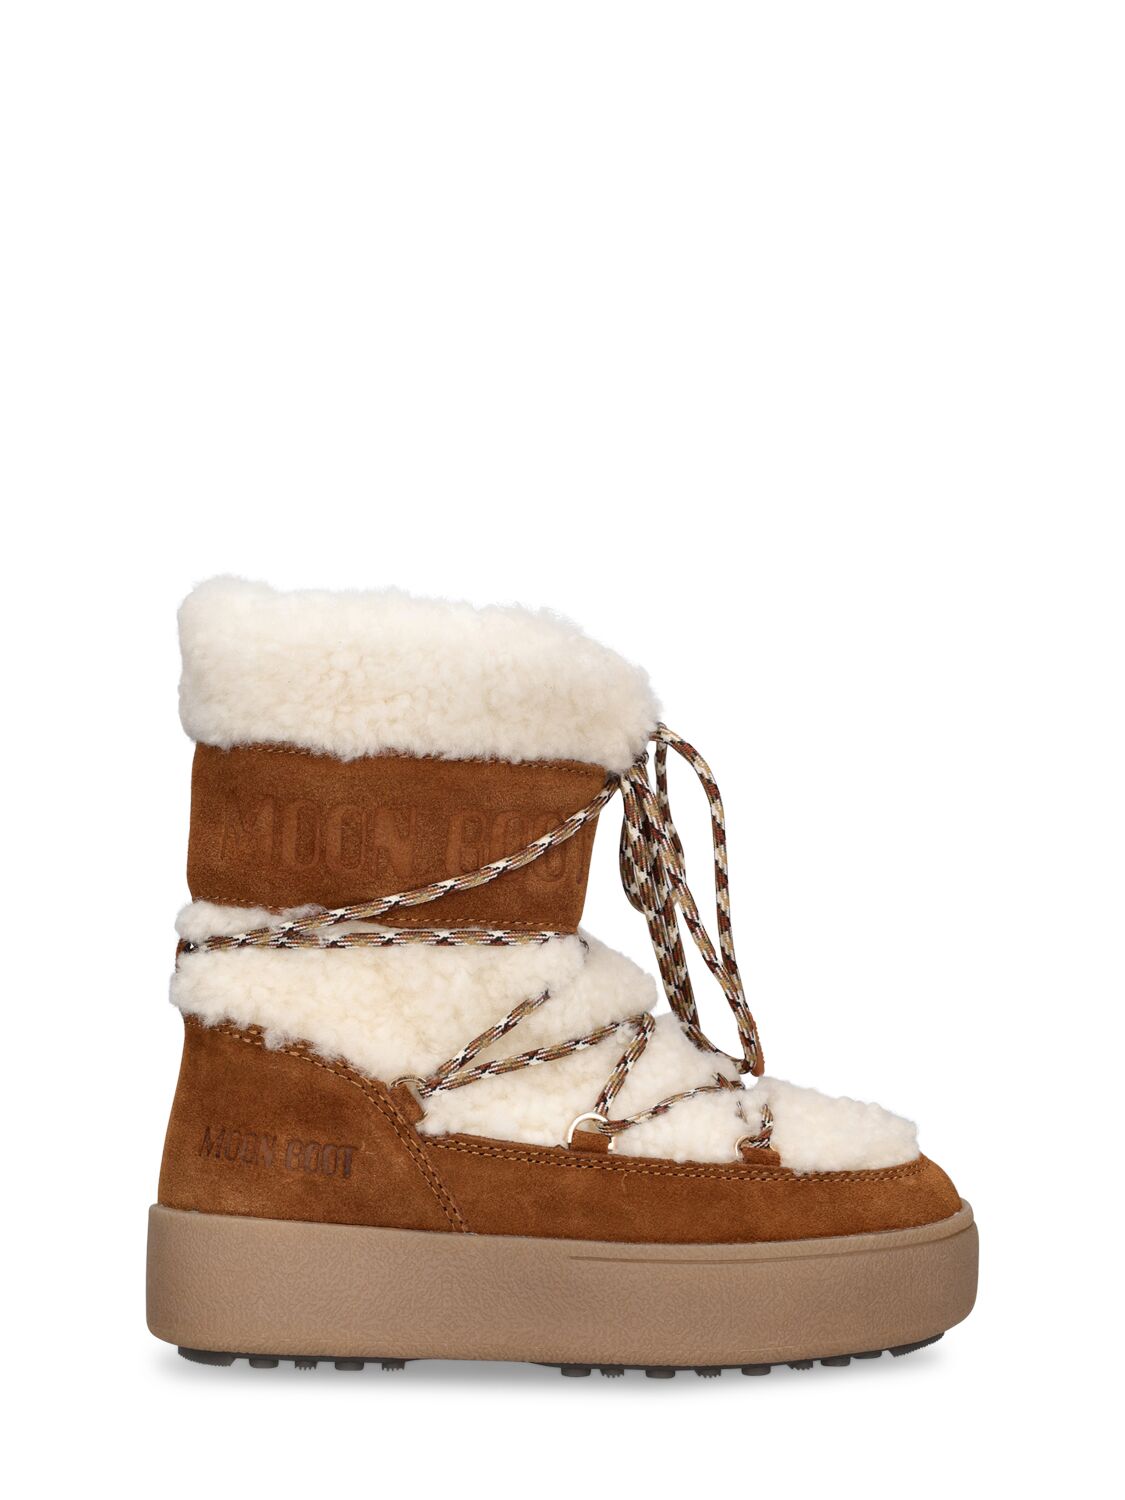 Image of Shearling & Suede Ankle Snow Boots